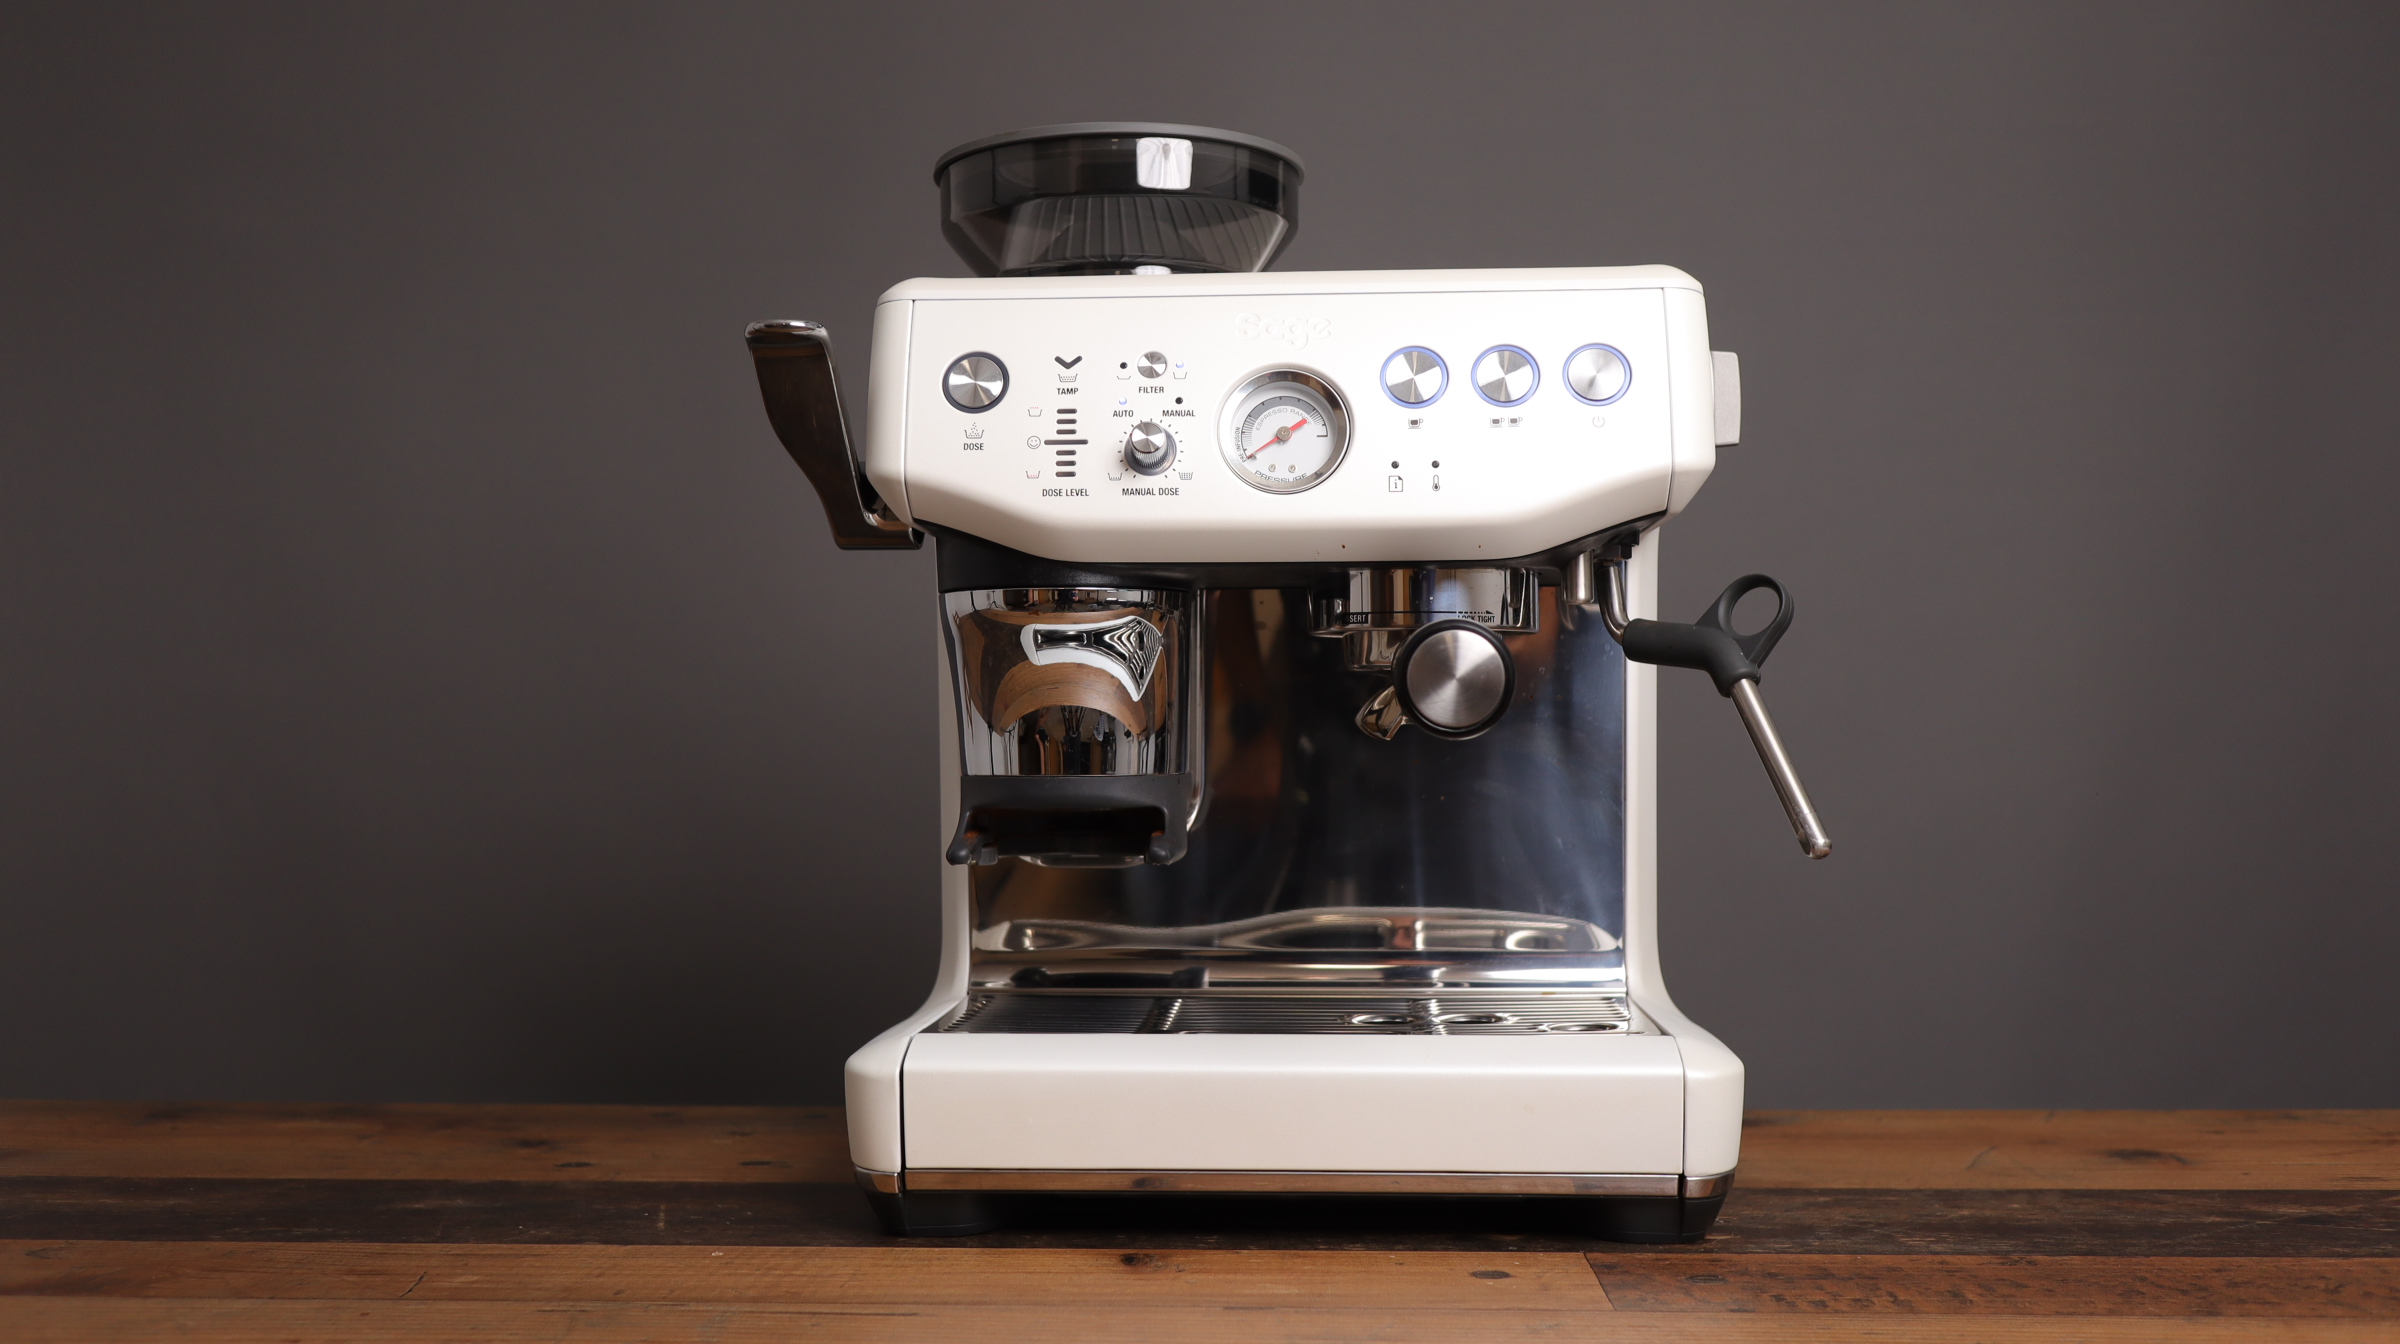 Front of the Breville Barista Express Impress